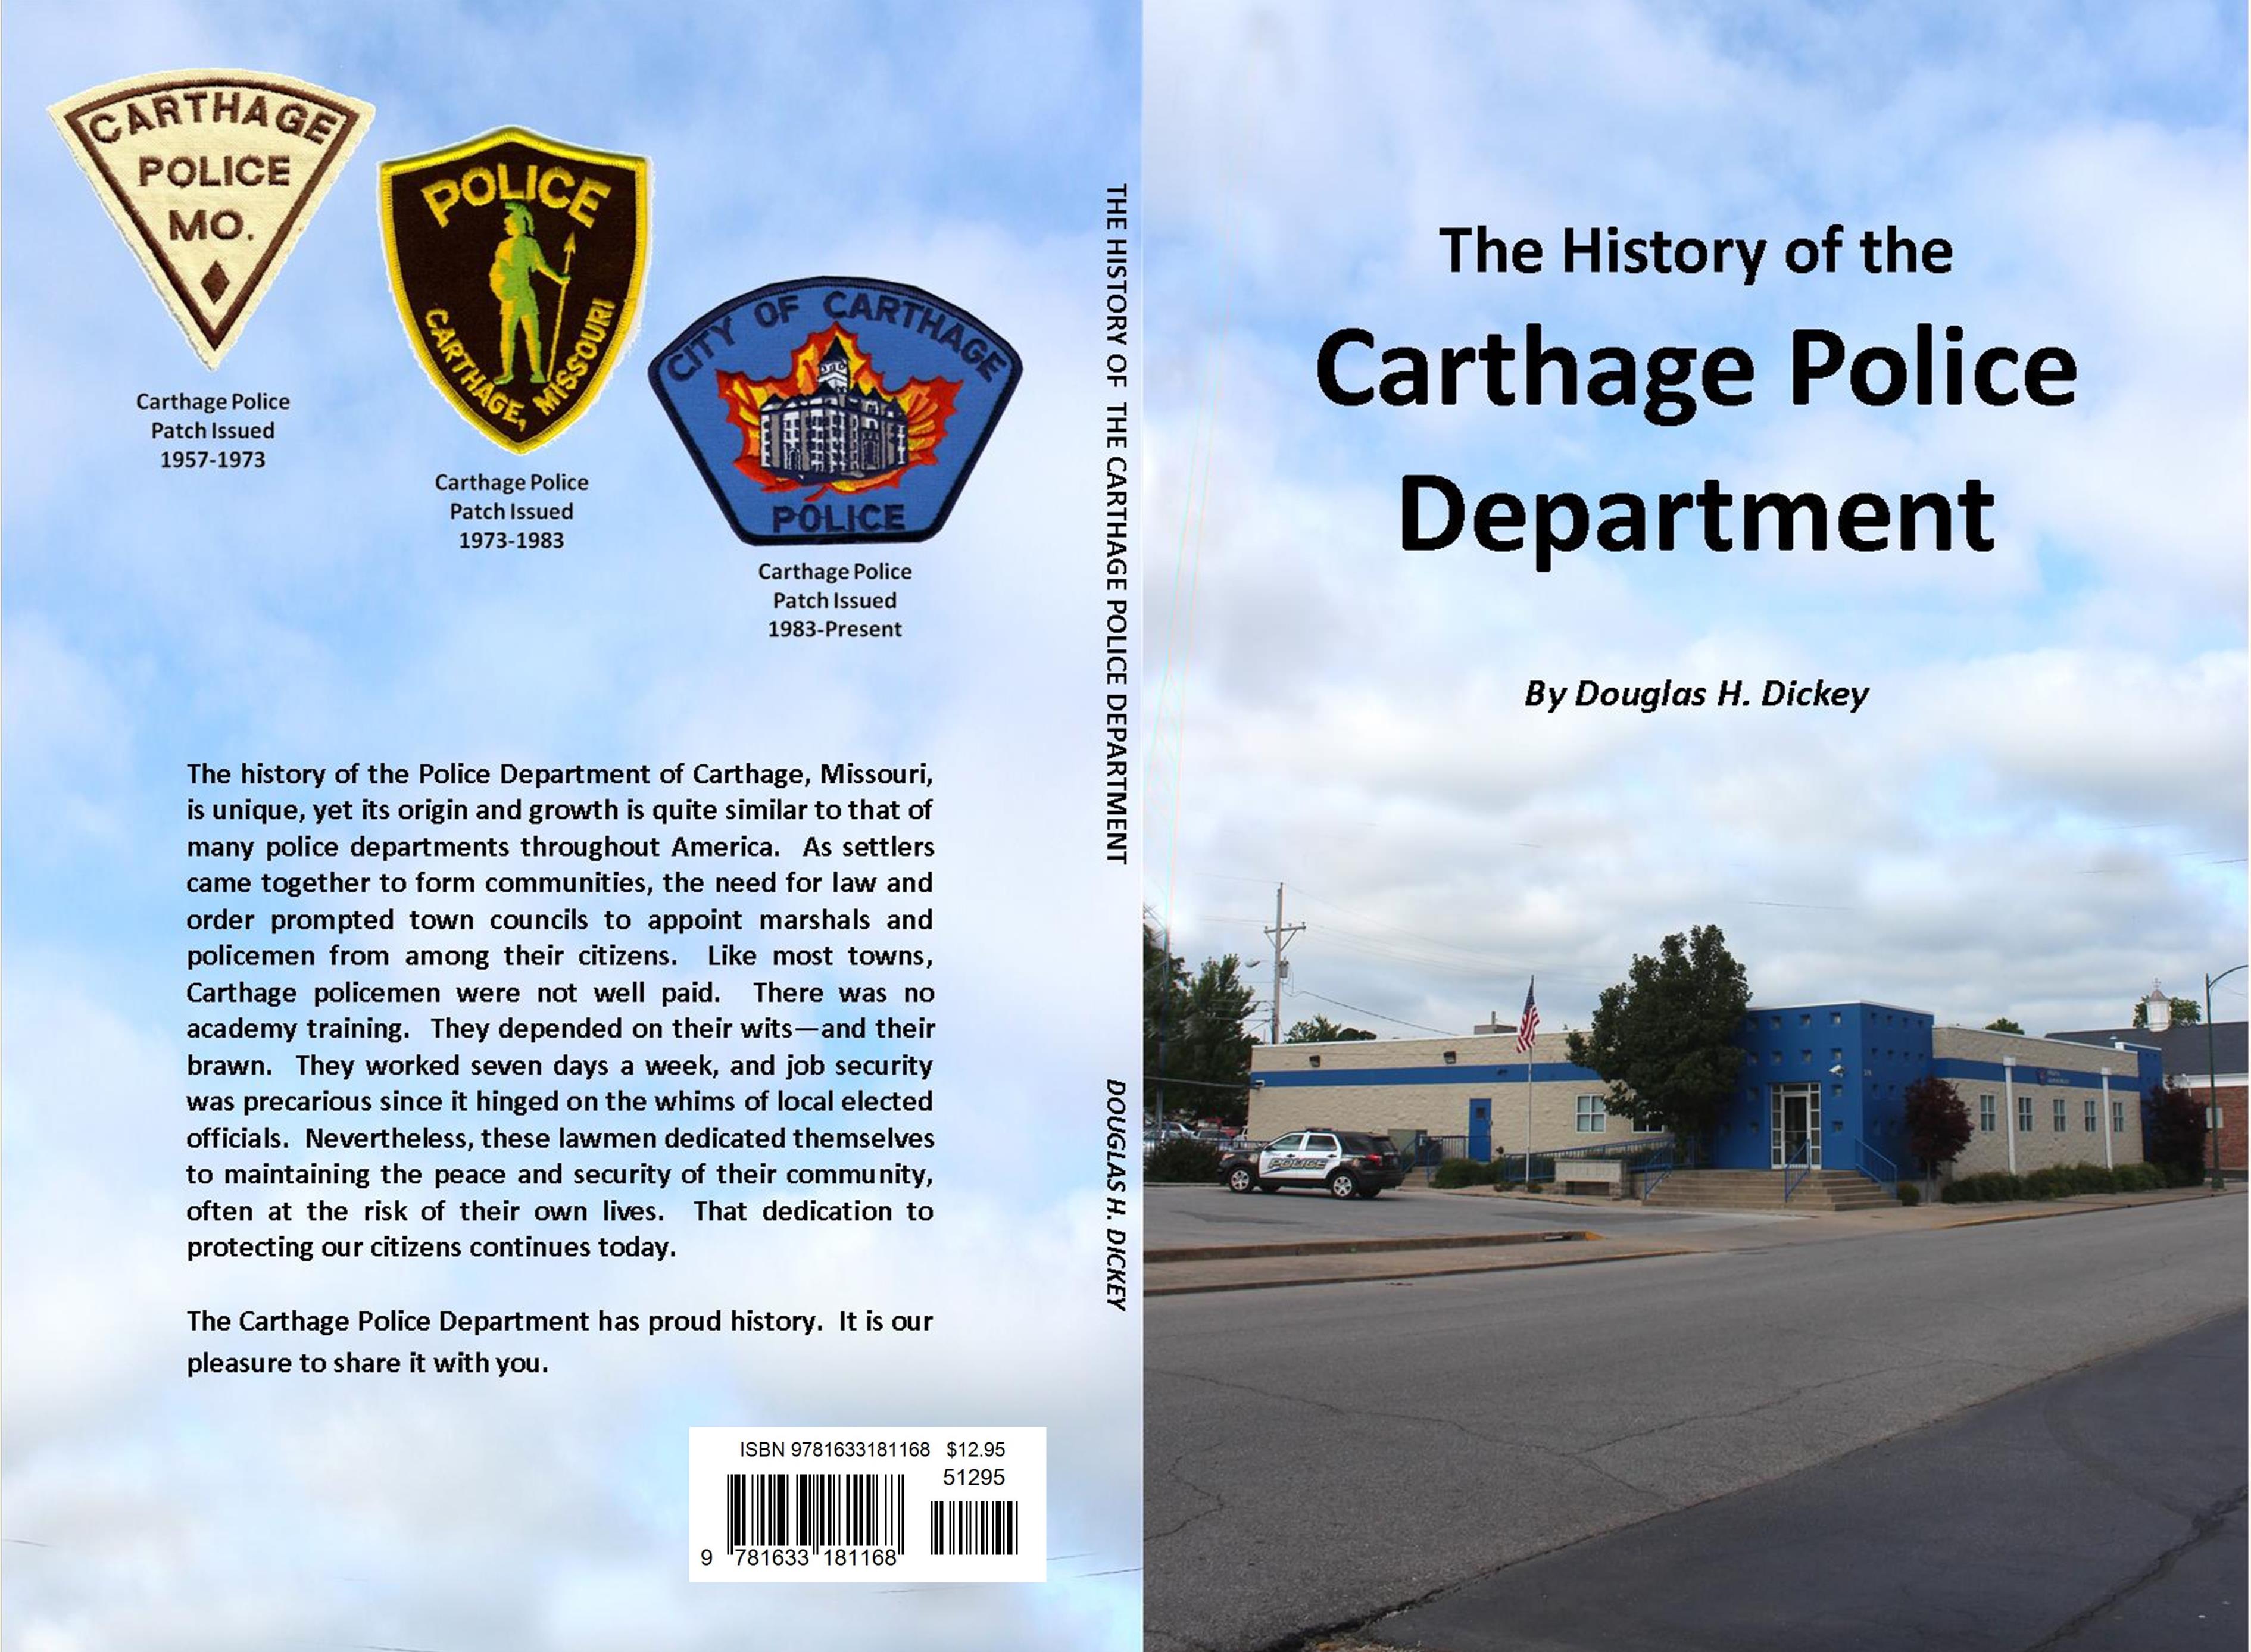 The History of the Carthage Police Department cover image